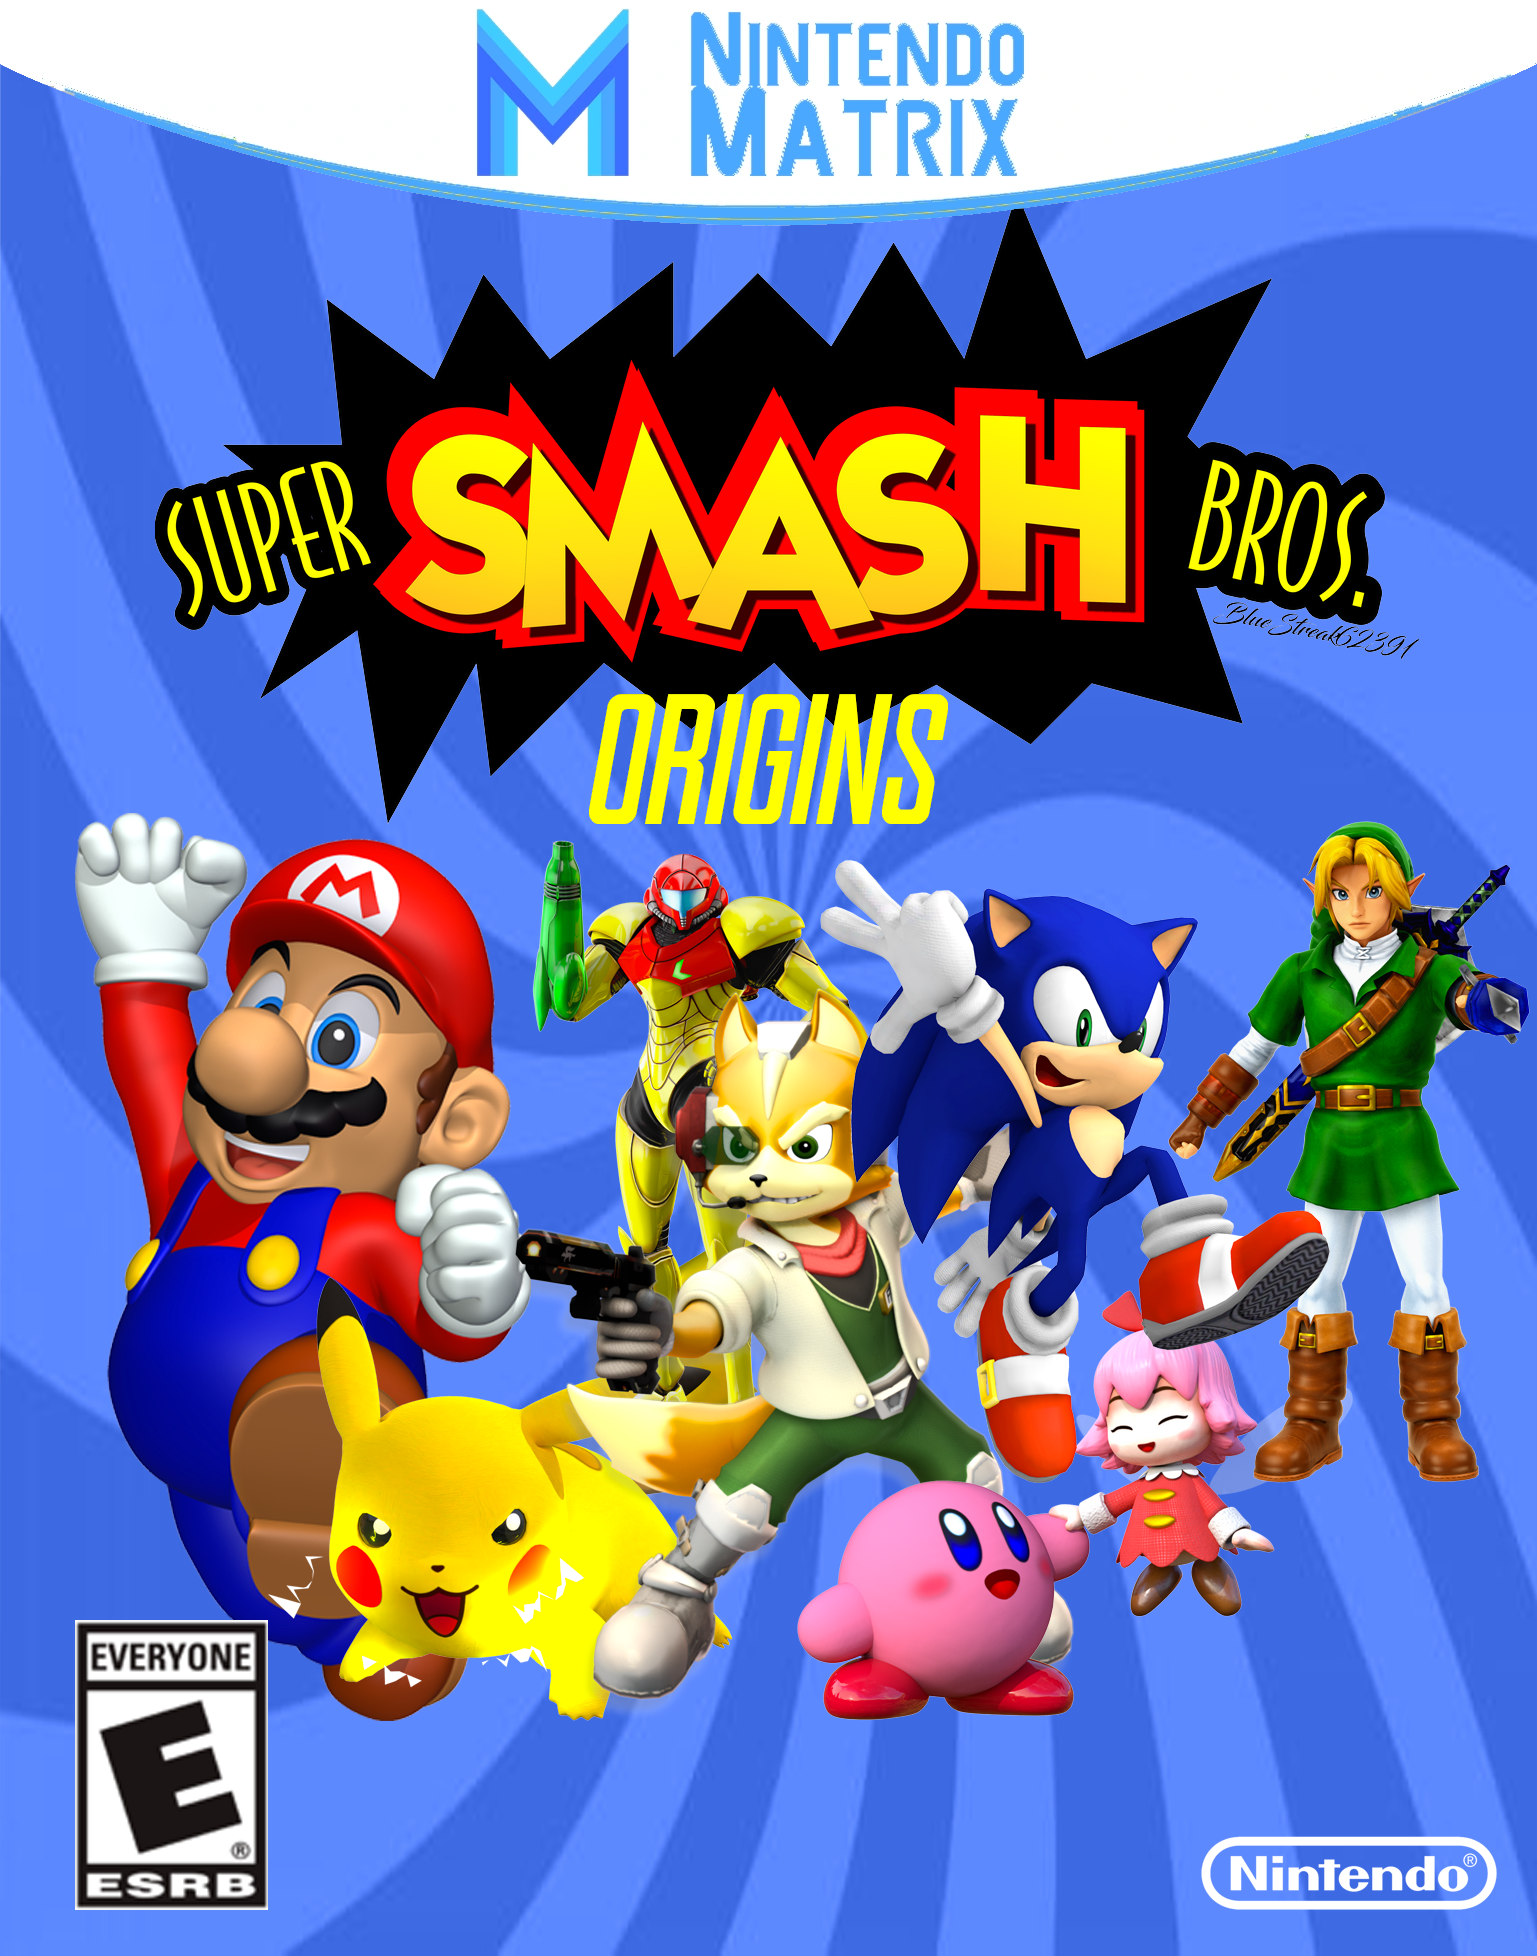 The First Super Smash Bros Game